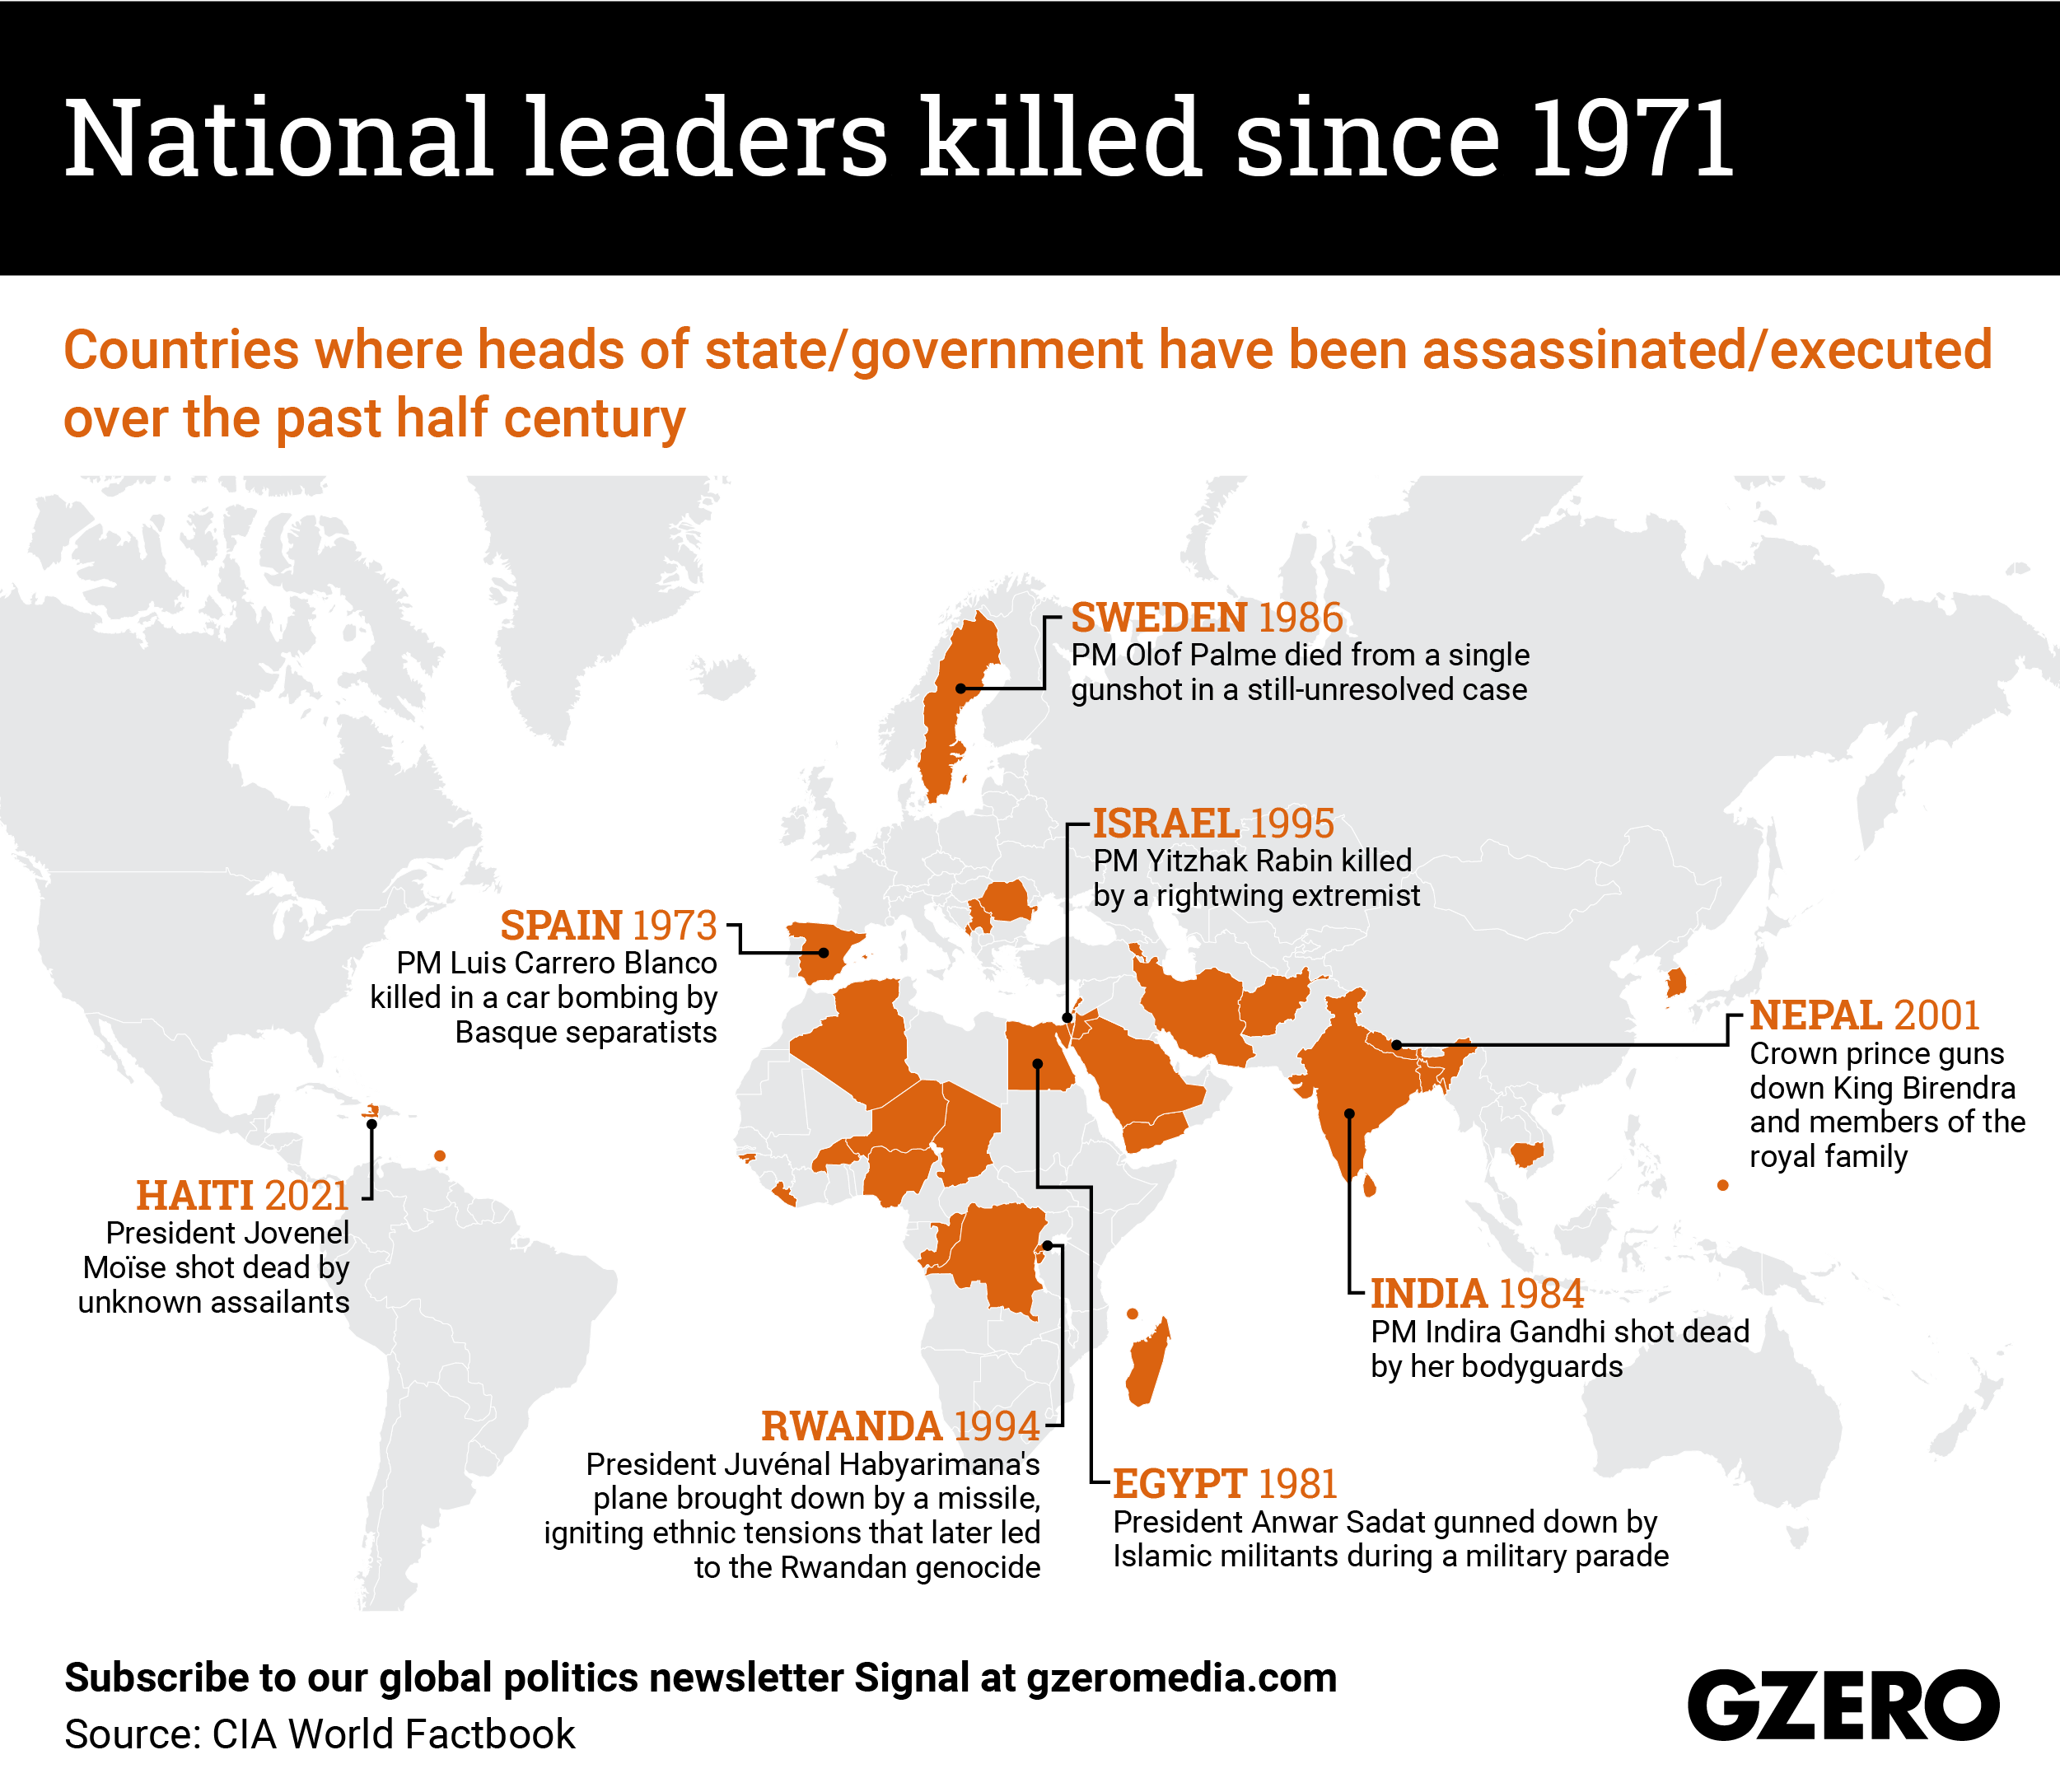 The Graphic Truth: National leaders killed since 1971